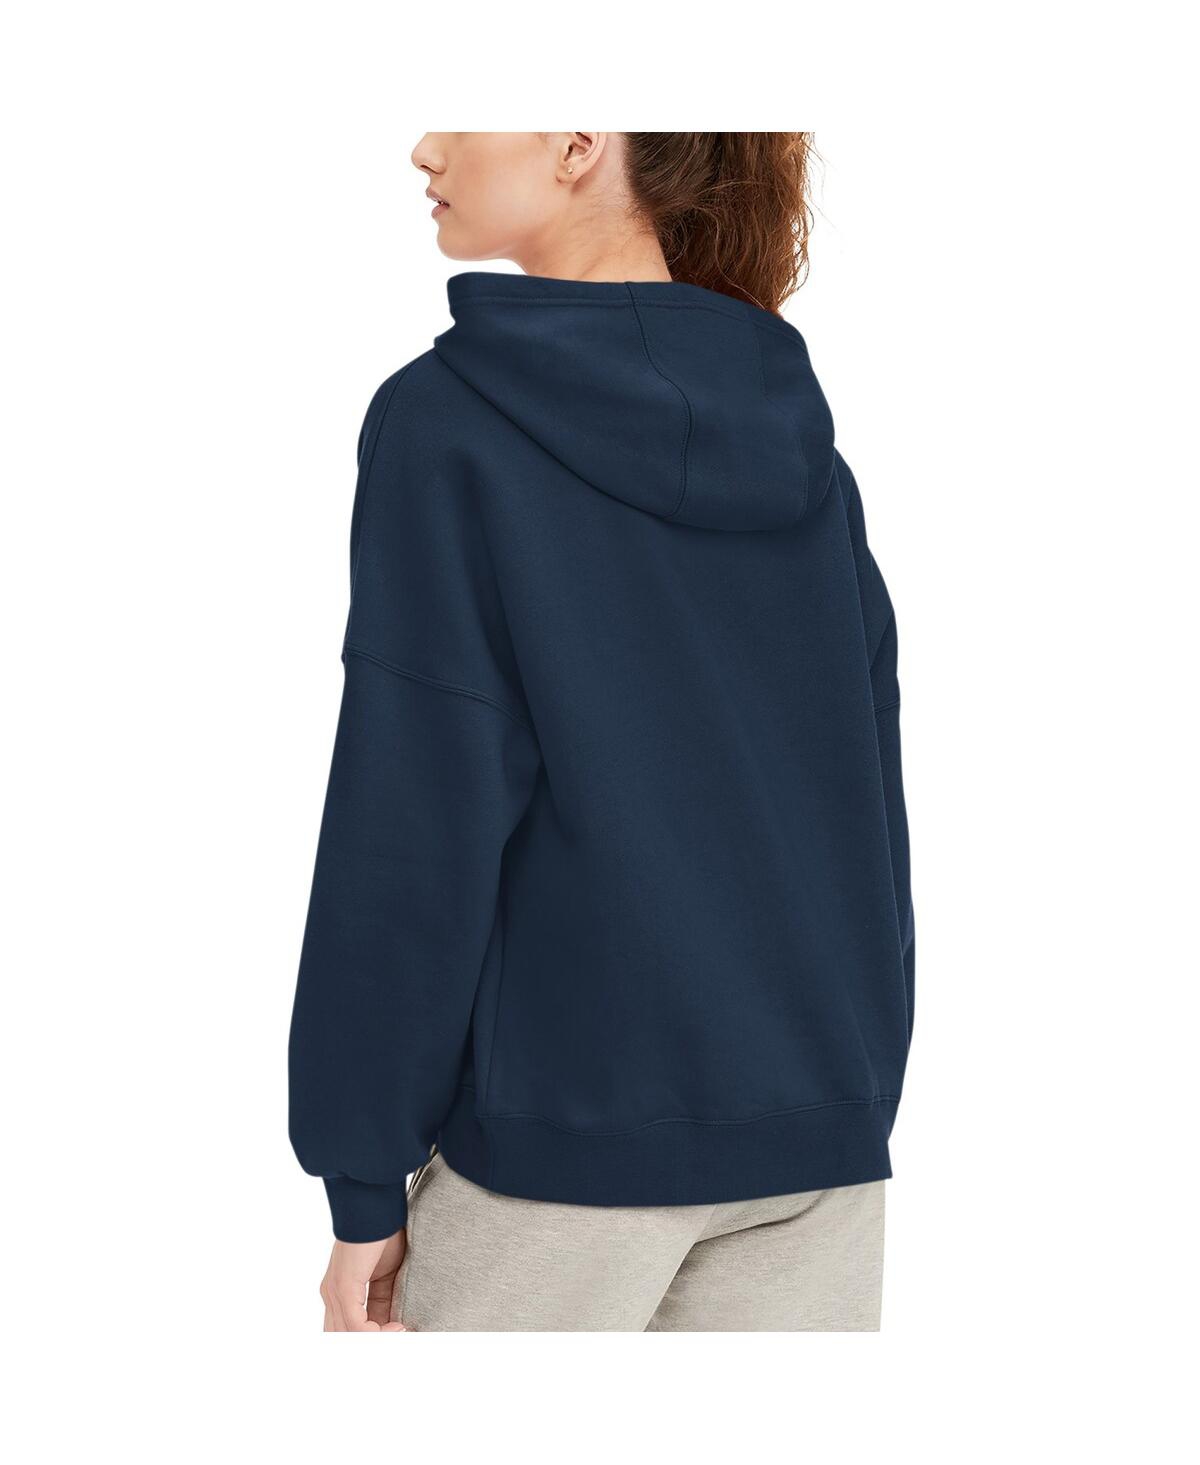 Shop Tommy Hilfiger Women's  Navy Dallas Cowboys Becca Dropped Shoulders Pullover Hoodie